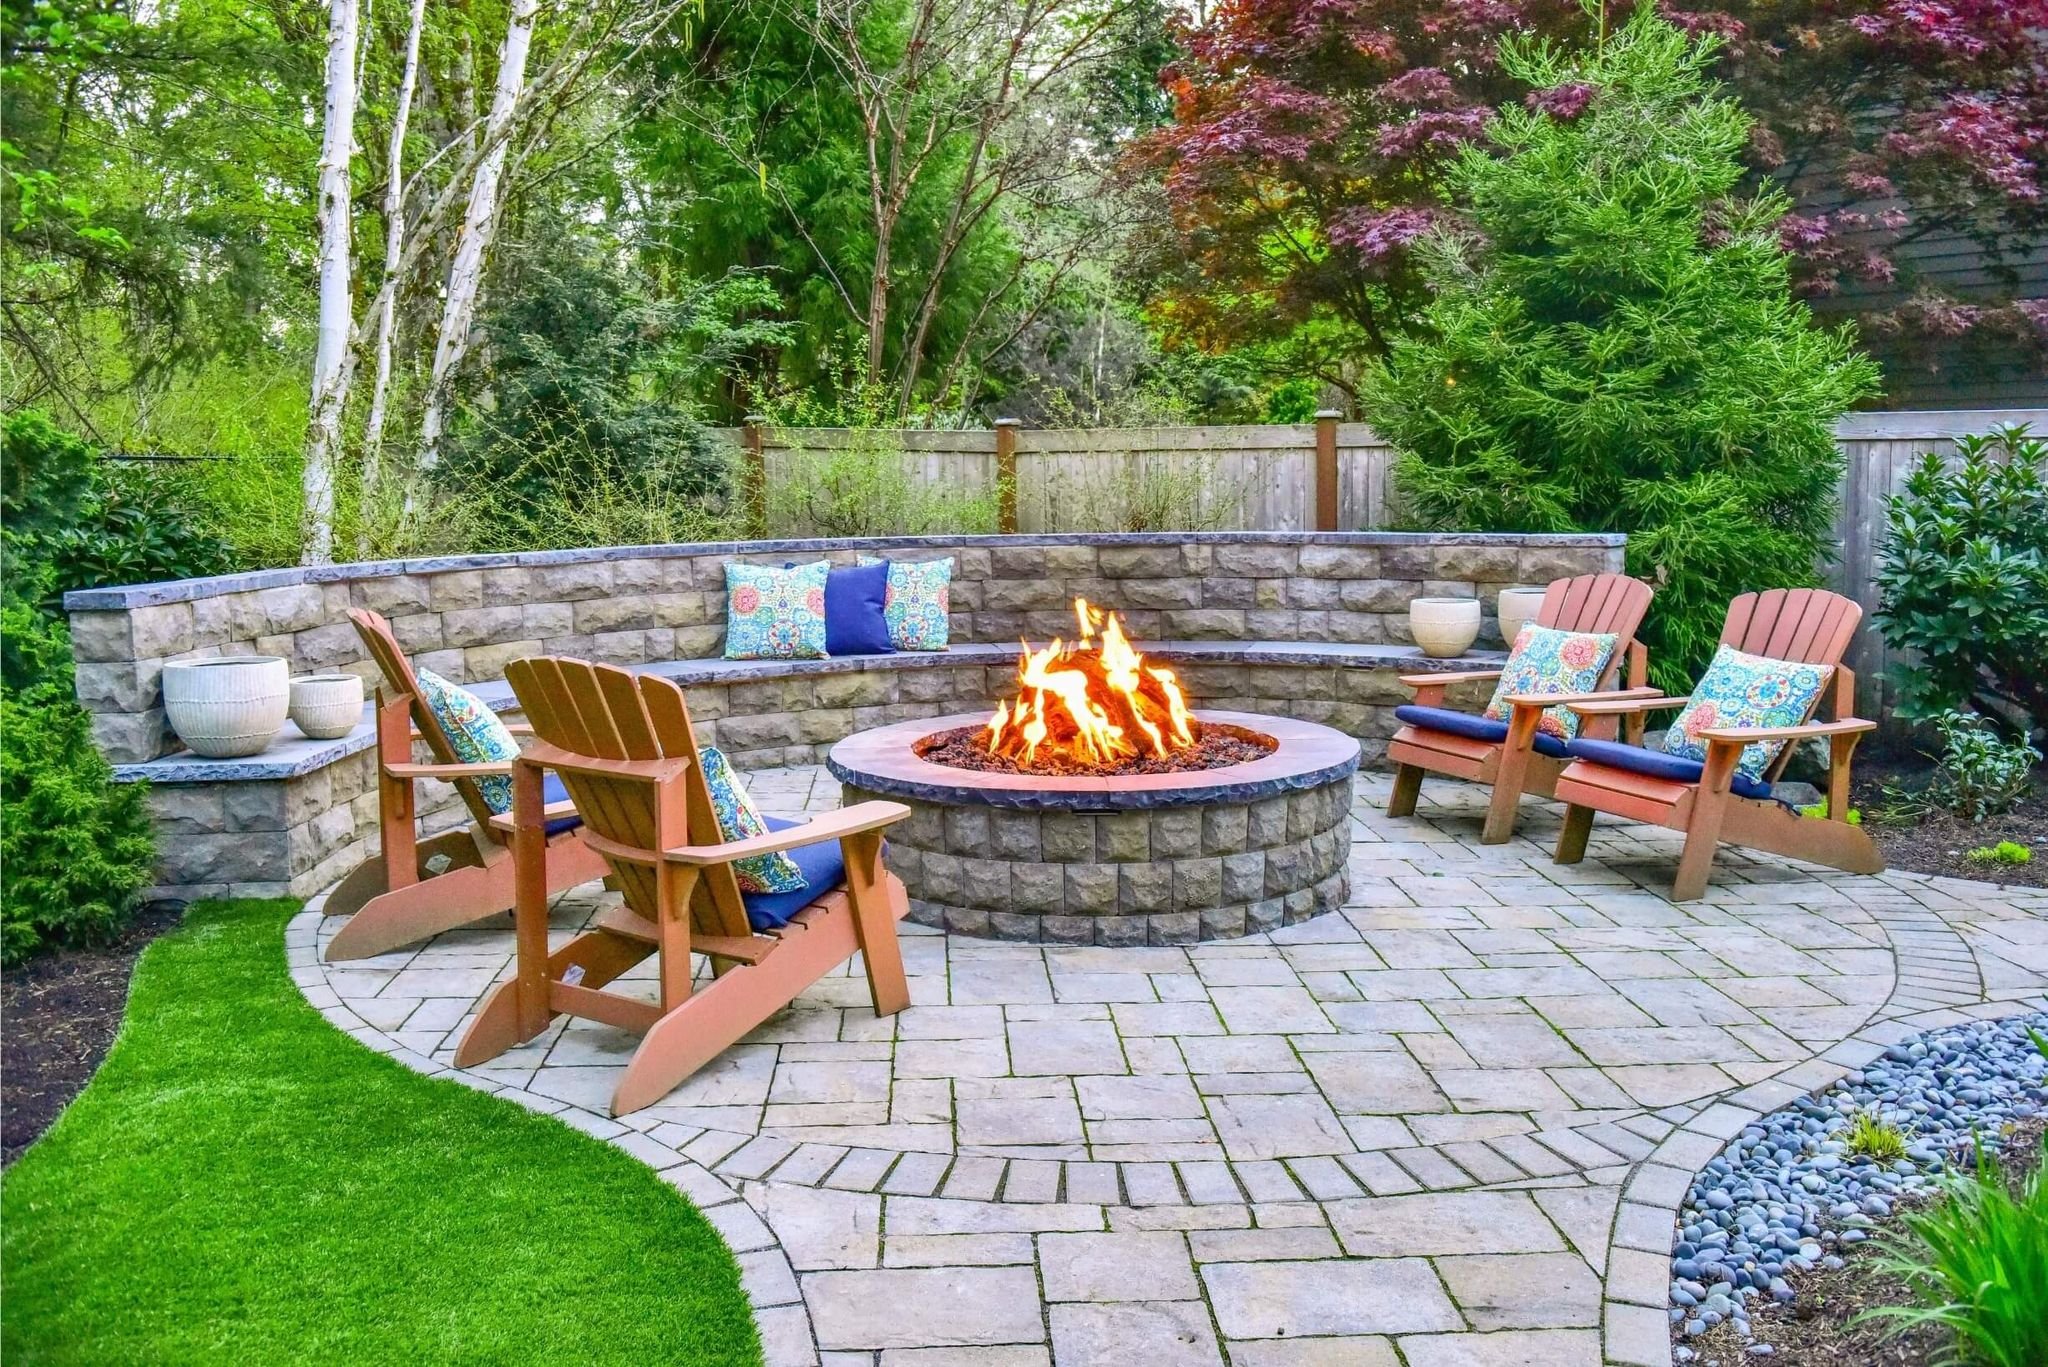 Imagine Relaxing By A Fire Pit On Your New Paver Patio In The Kirkland, Wa,  Area | Outdoor Design By Oz